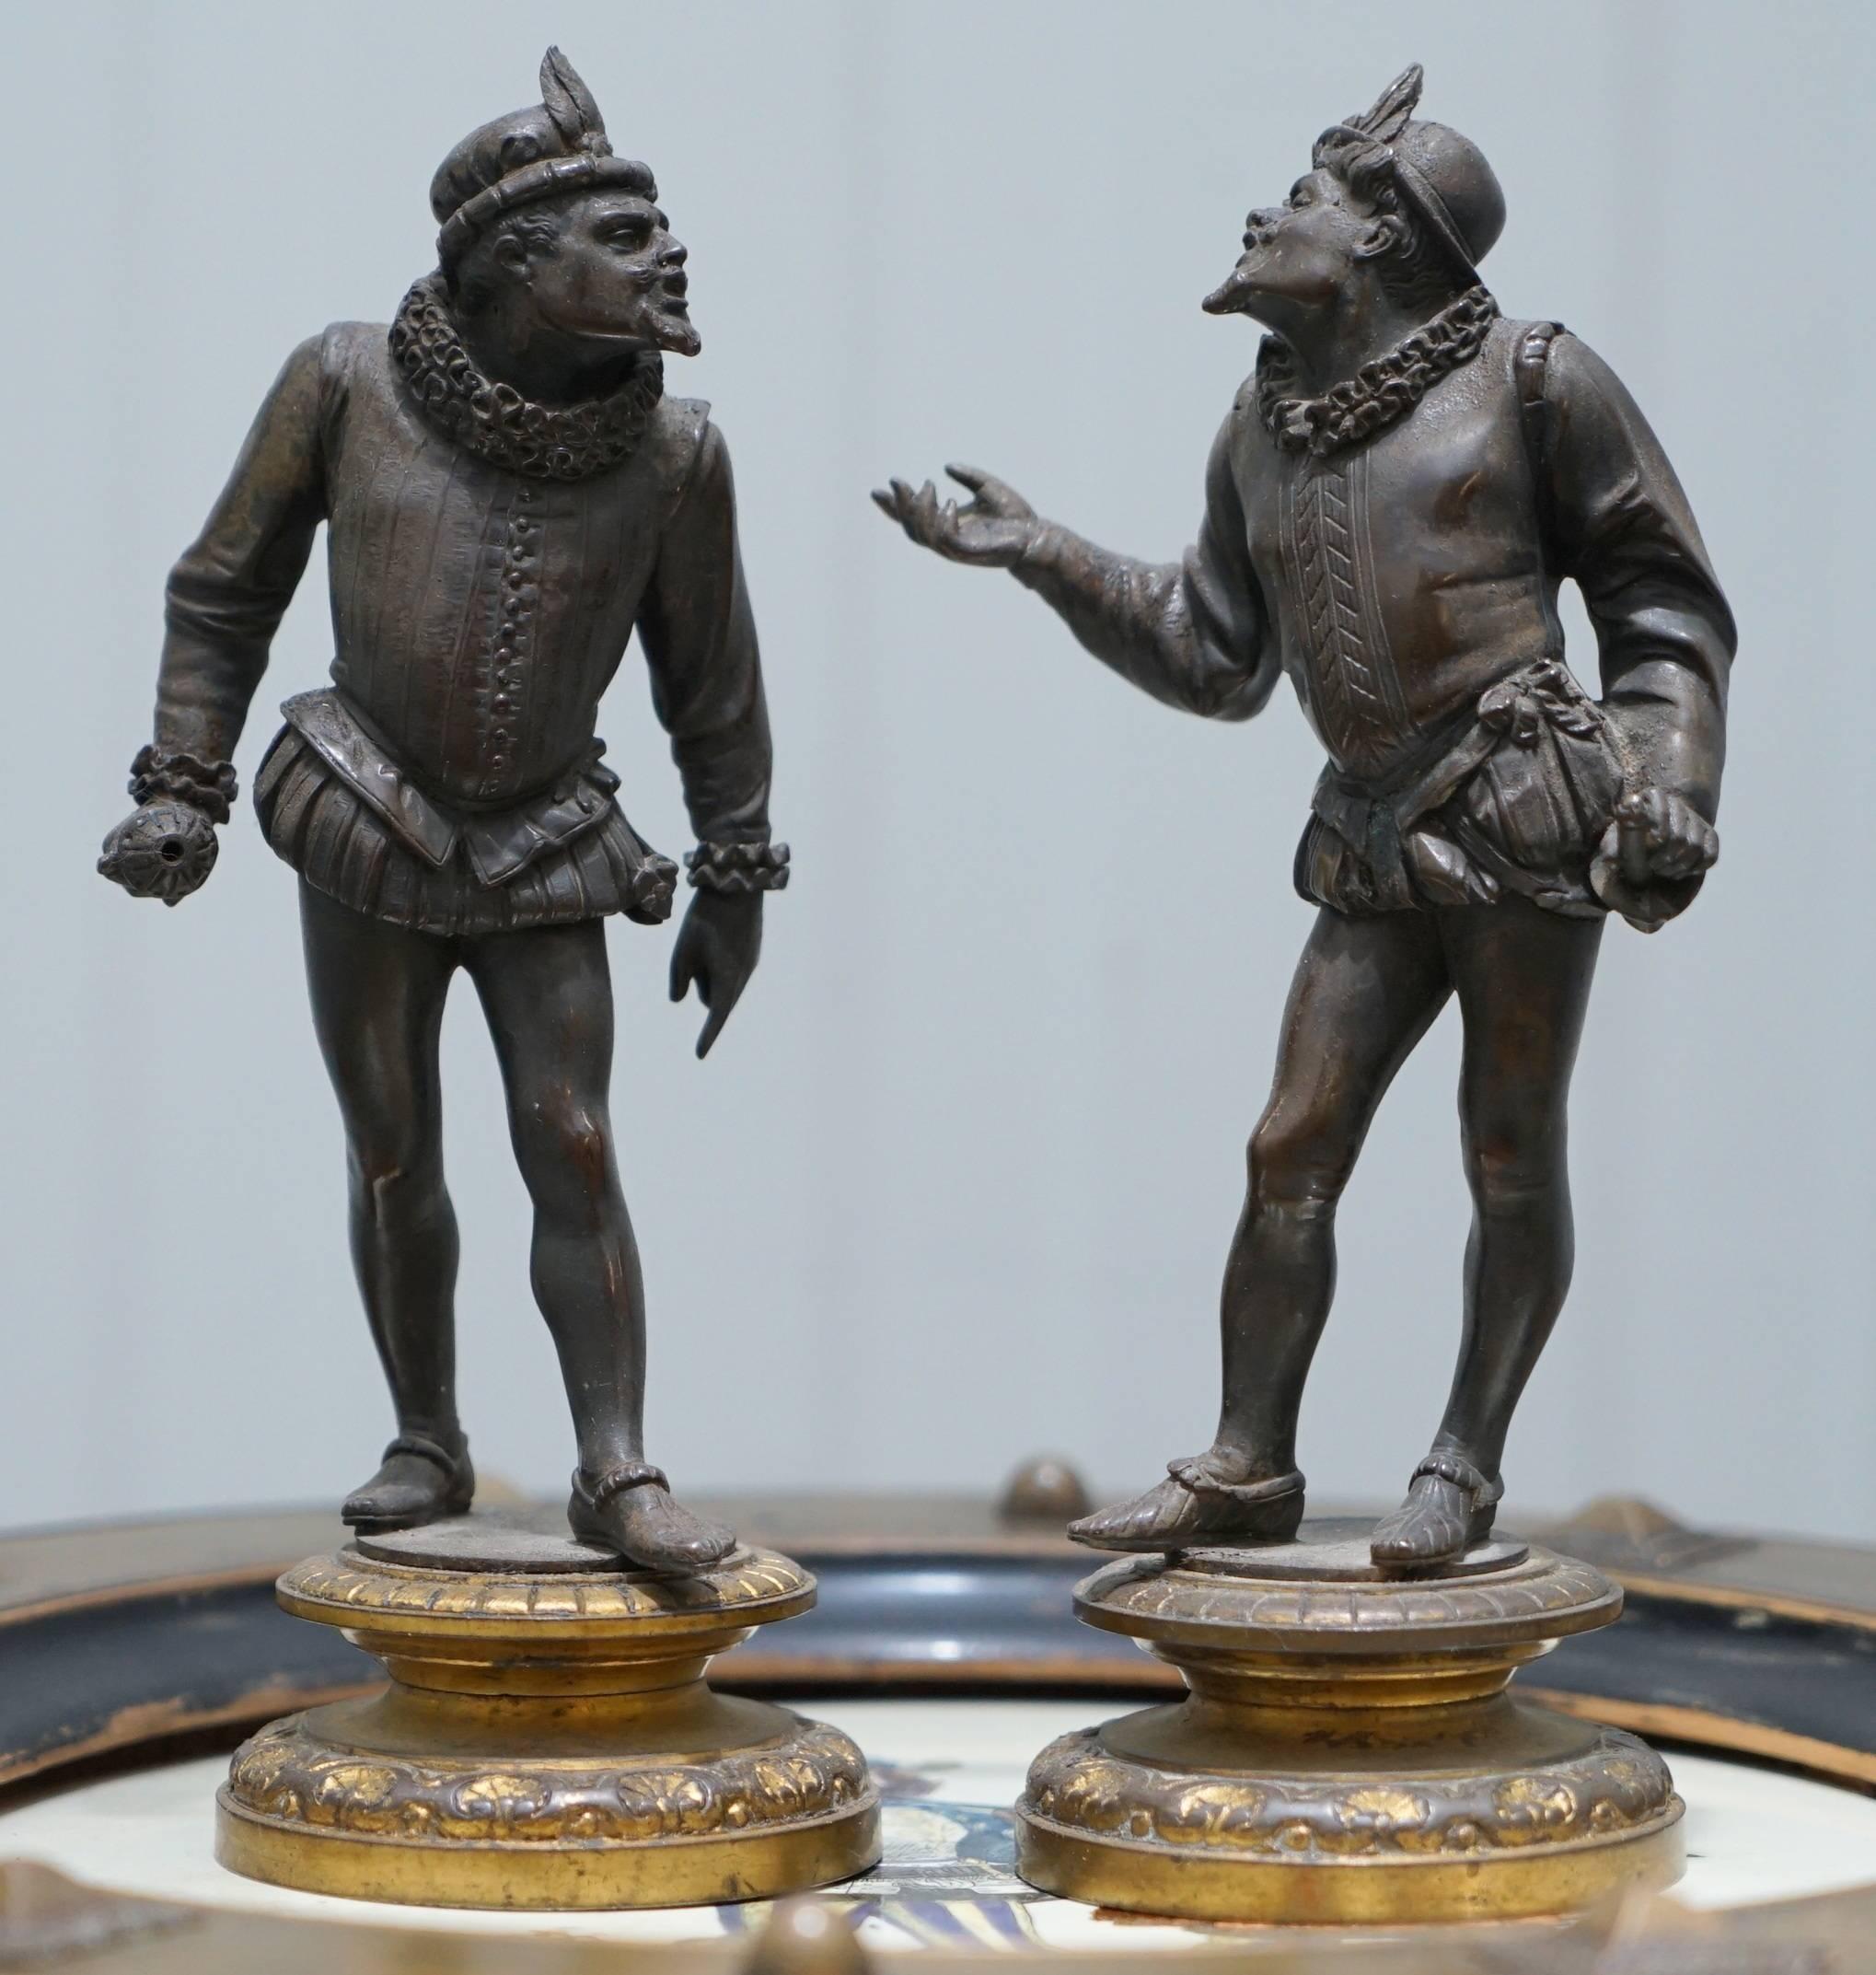 We are delighted to offer for sale this pair of very good looking bronze dandy’s getting ready to duel

As you can see there is some insult has taken place and gloves have been thrown down, you can see one glove cast into the base. The pair look